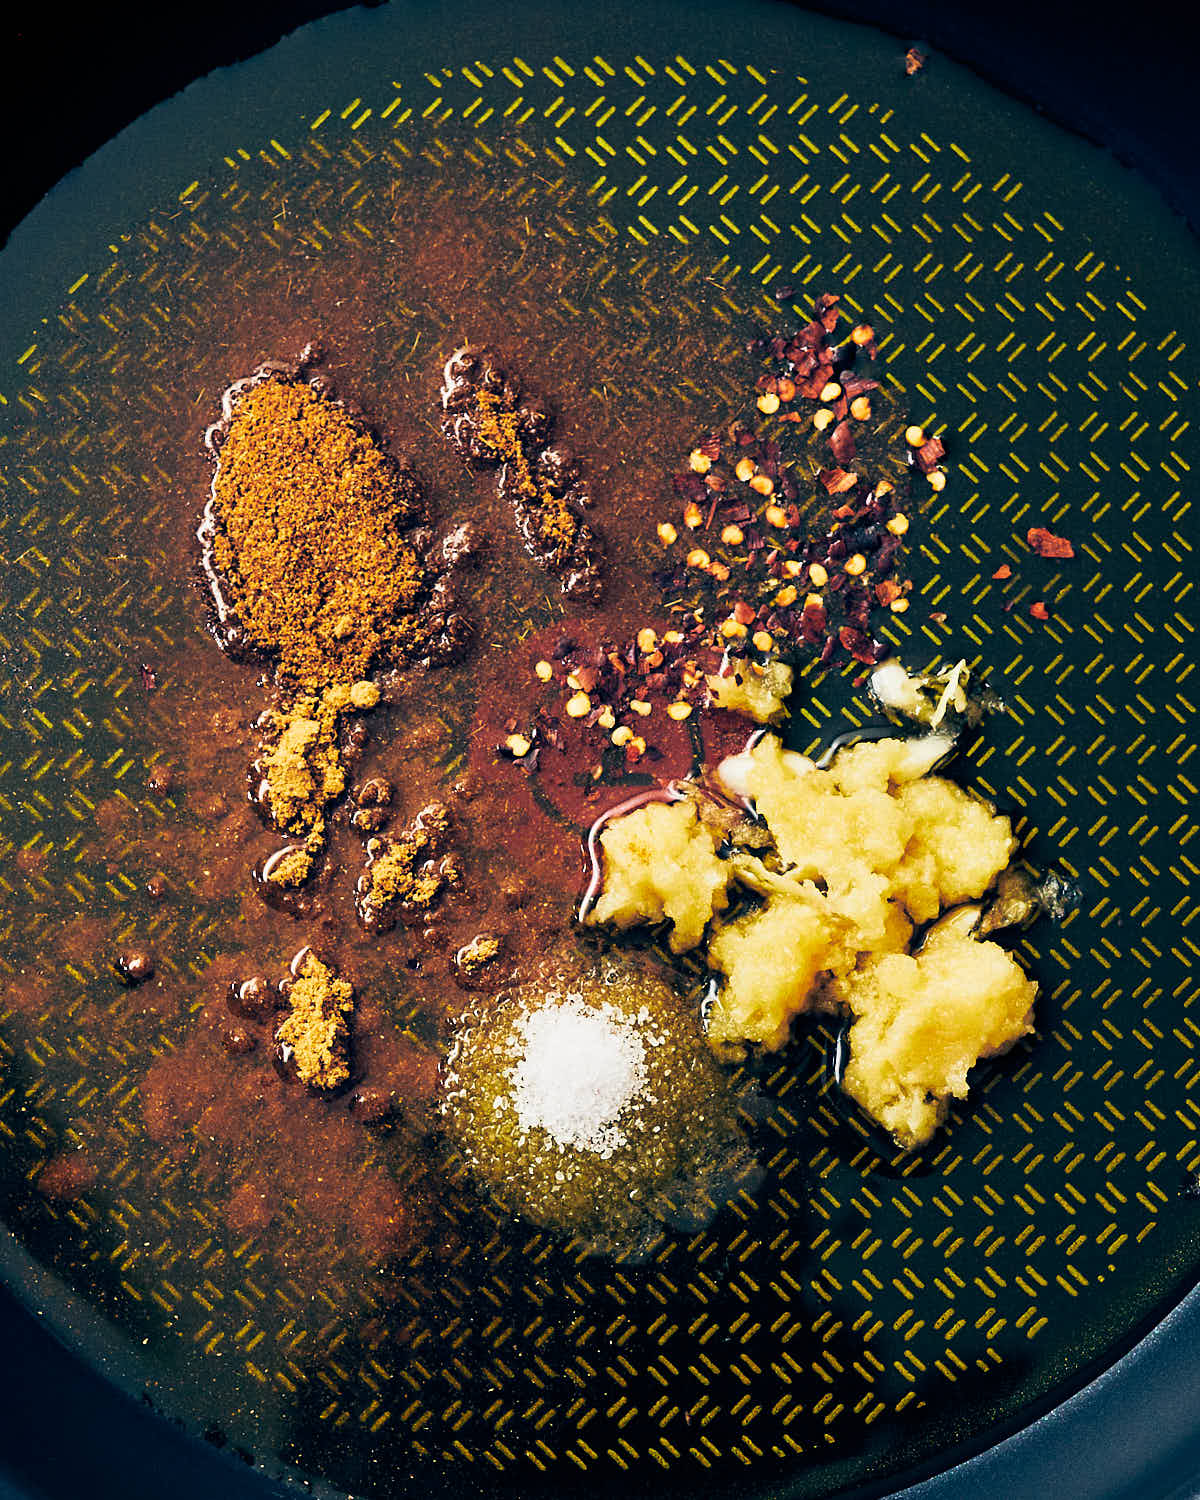 Spices, salt, garlic, and red pepper flakes in a skillet pan with olive oil for halloumi couscous salad.